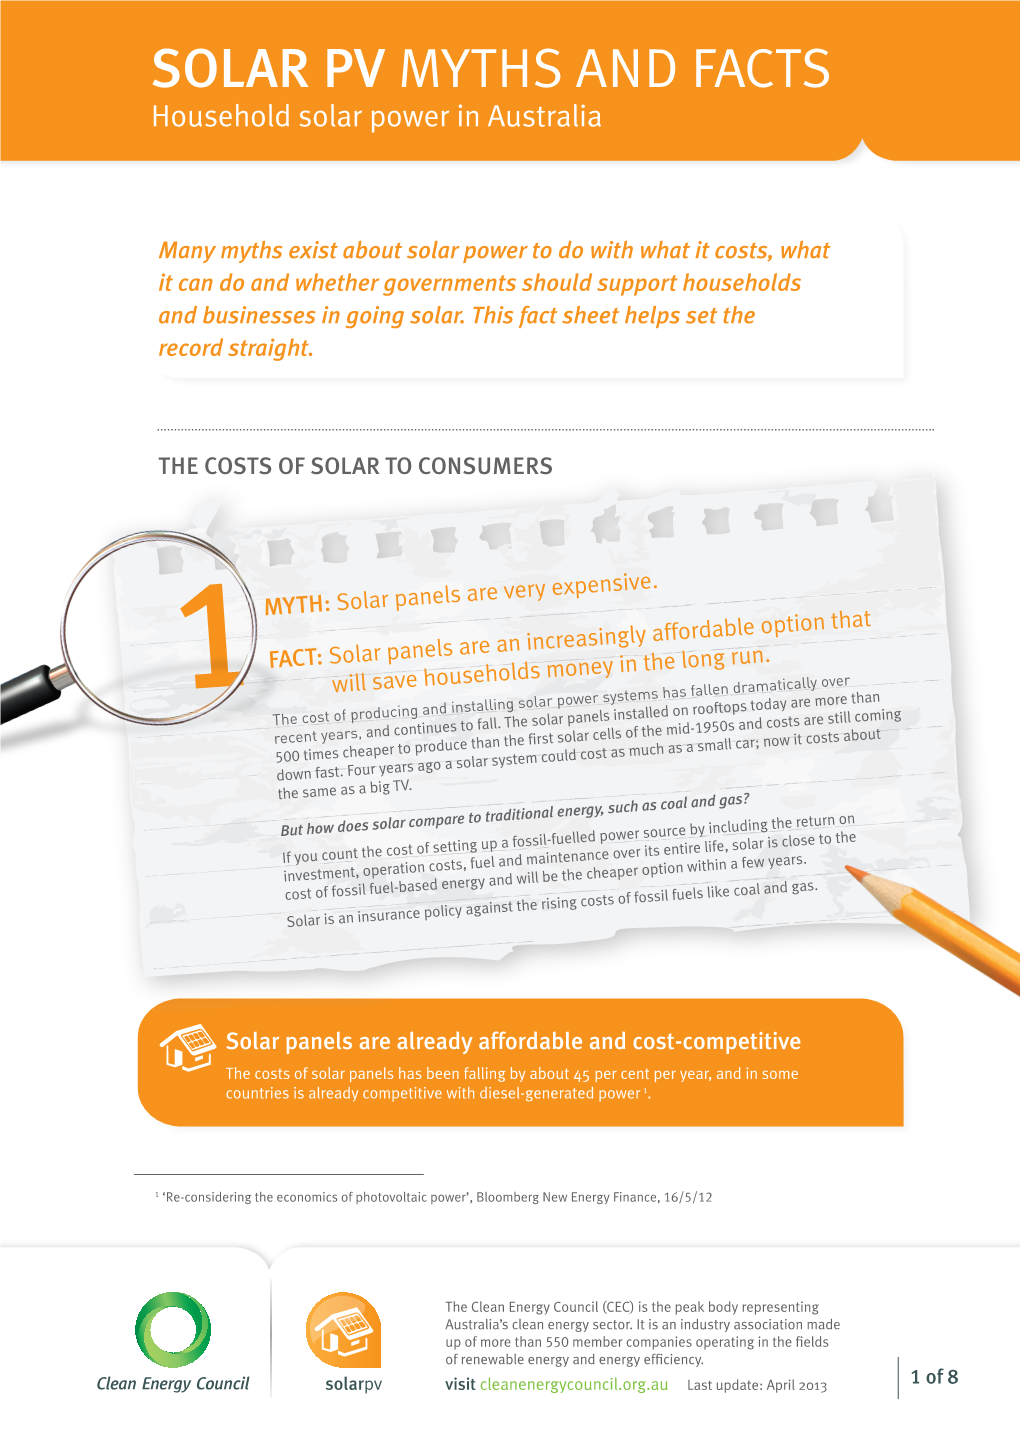 SOLAR PV MYTHS and FACTS Household Solar Power in Australia